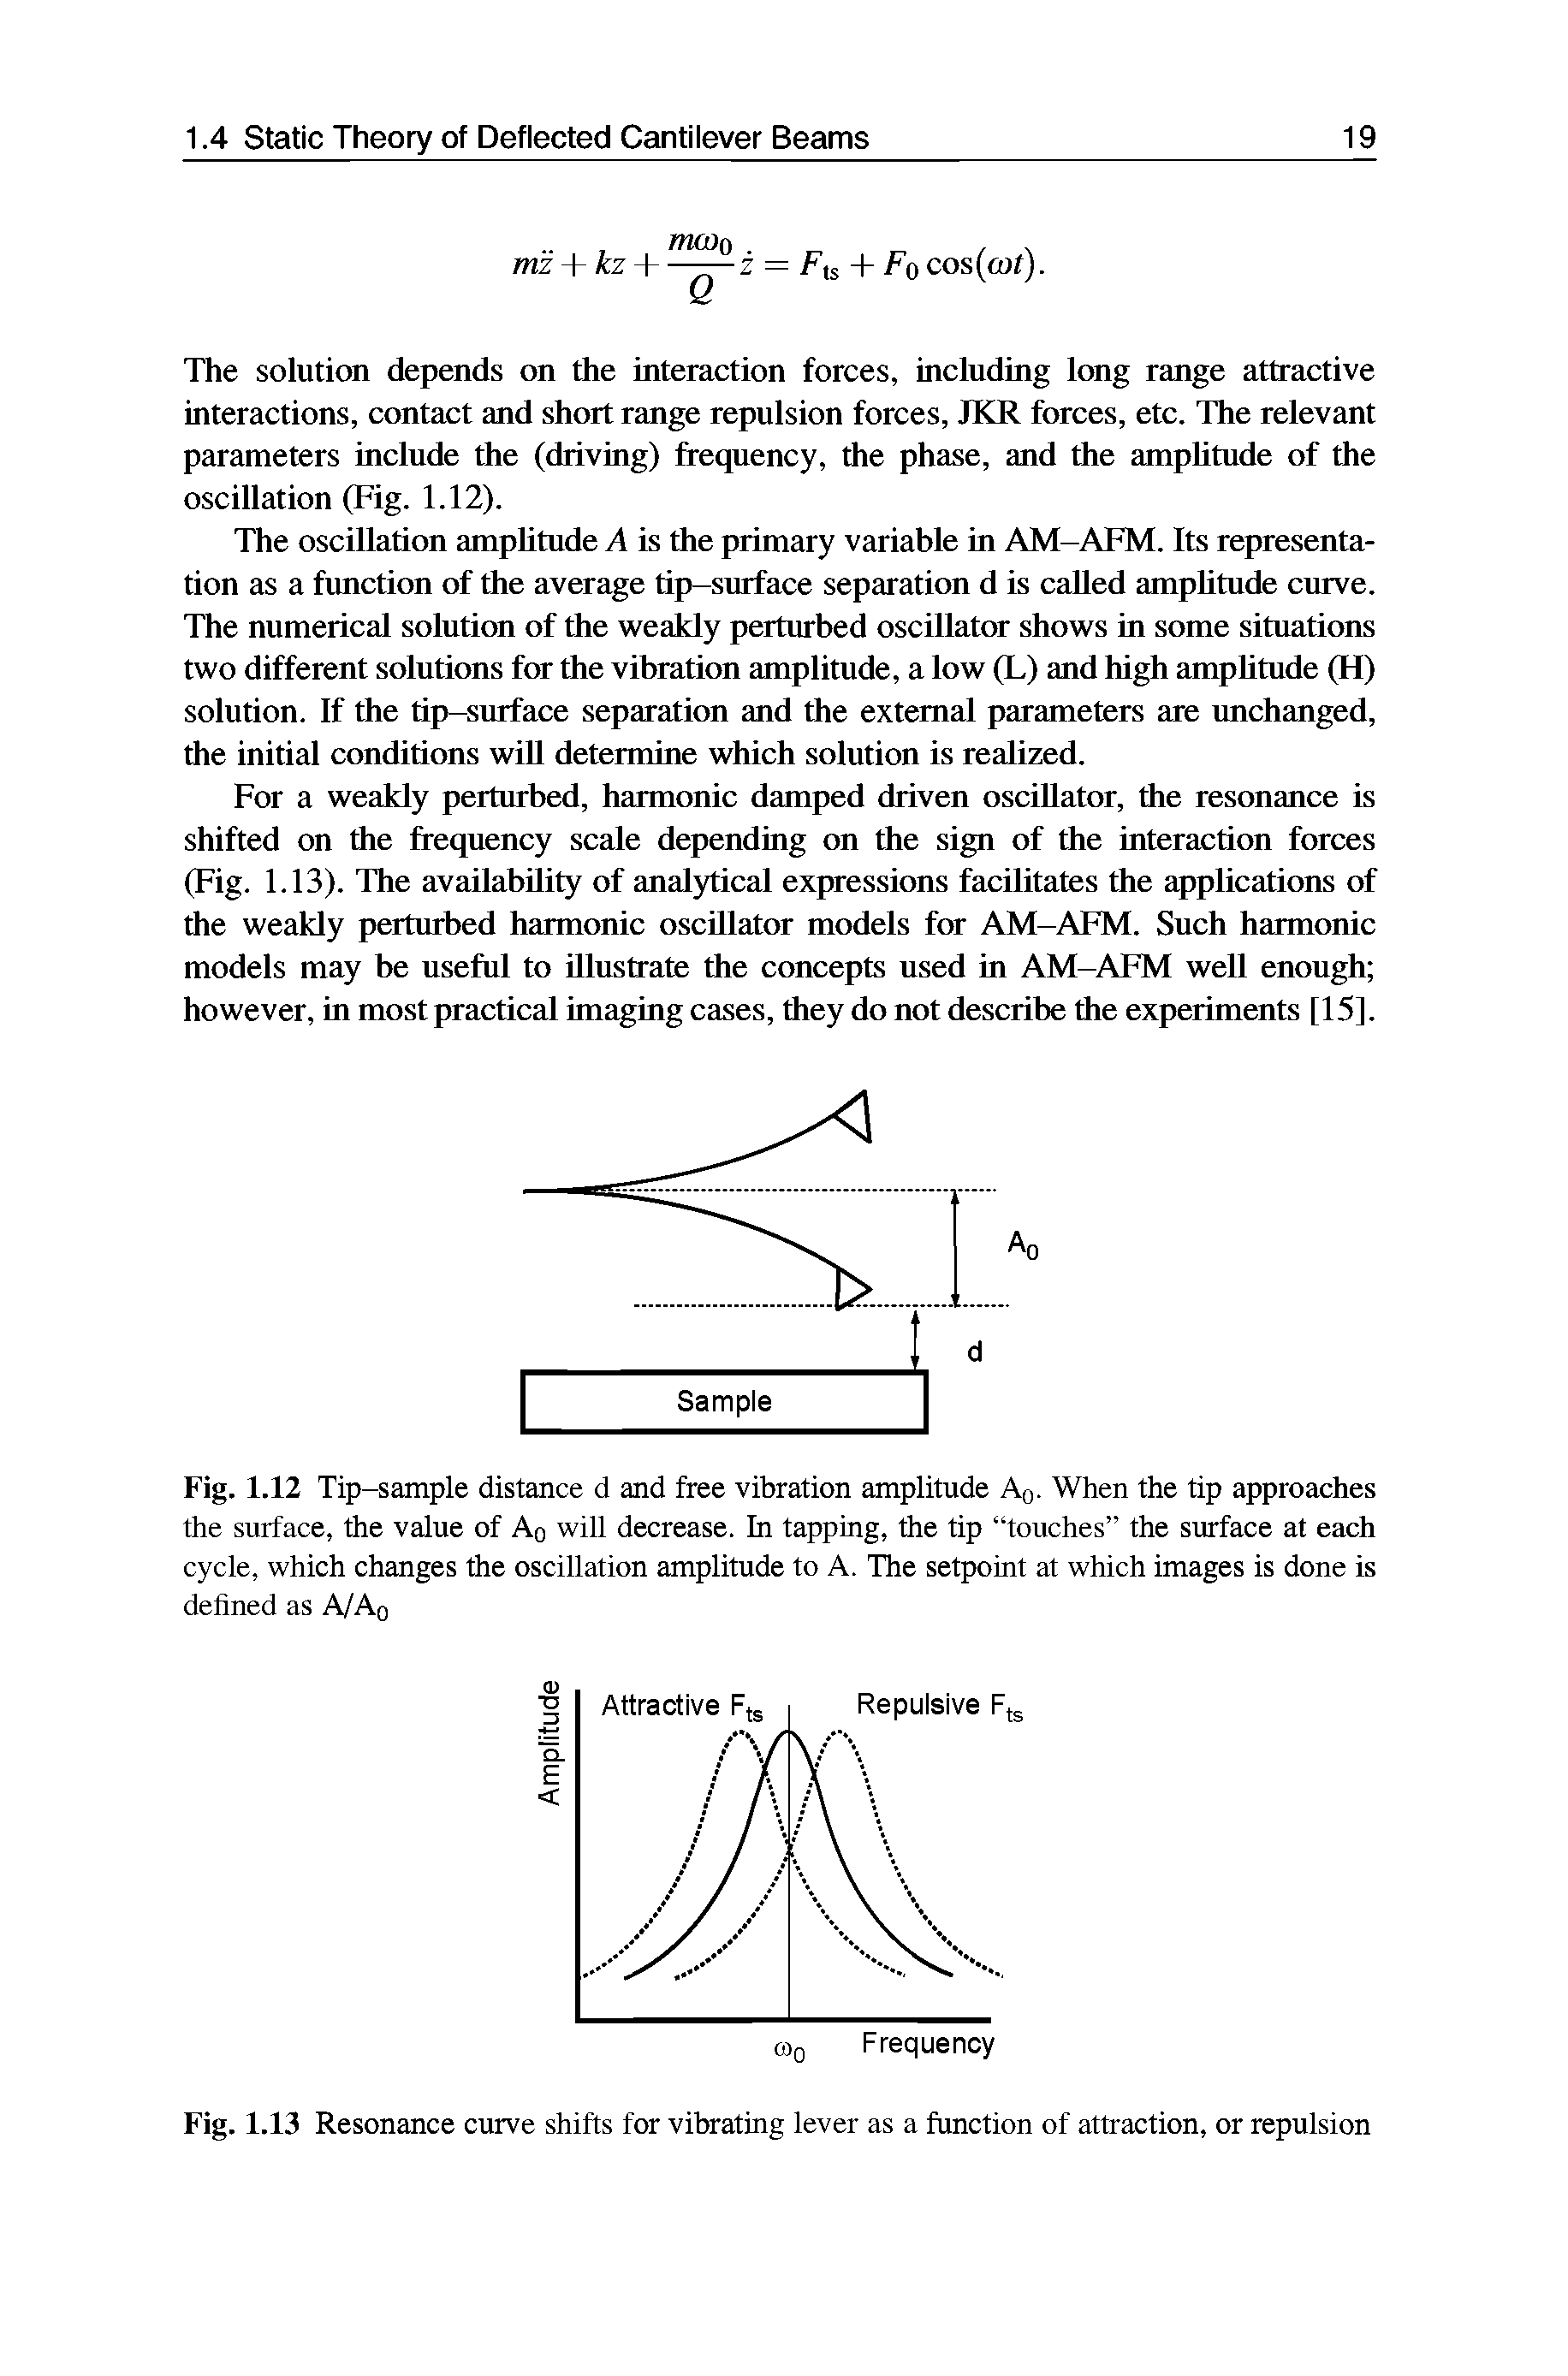 Fig. 1.12 Tip-sample distance d and free vibration amplitude A0. When the tip approaches the surface, the value of A0 will decrease. In tapping, the tip touches the surface at each cycle, which changes the oscillation amplitude to A. The setpoint at which images is done is defined as A/A0...